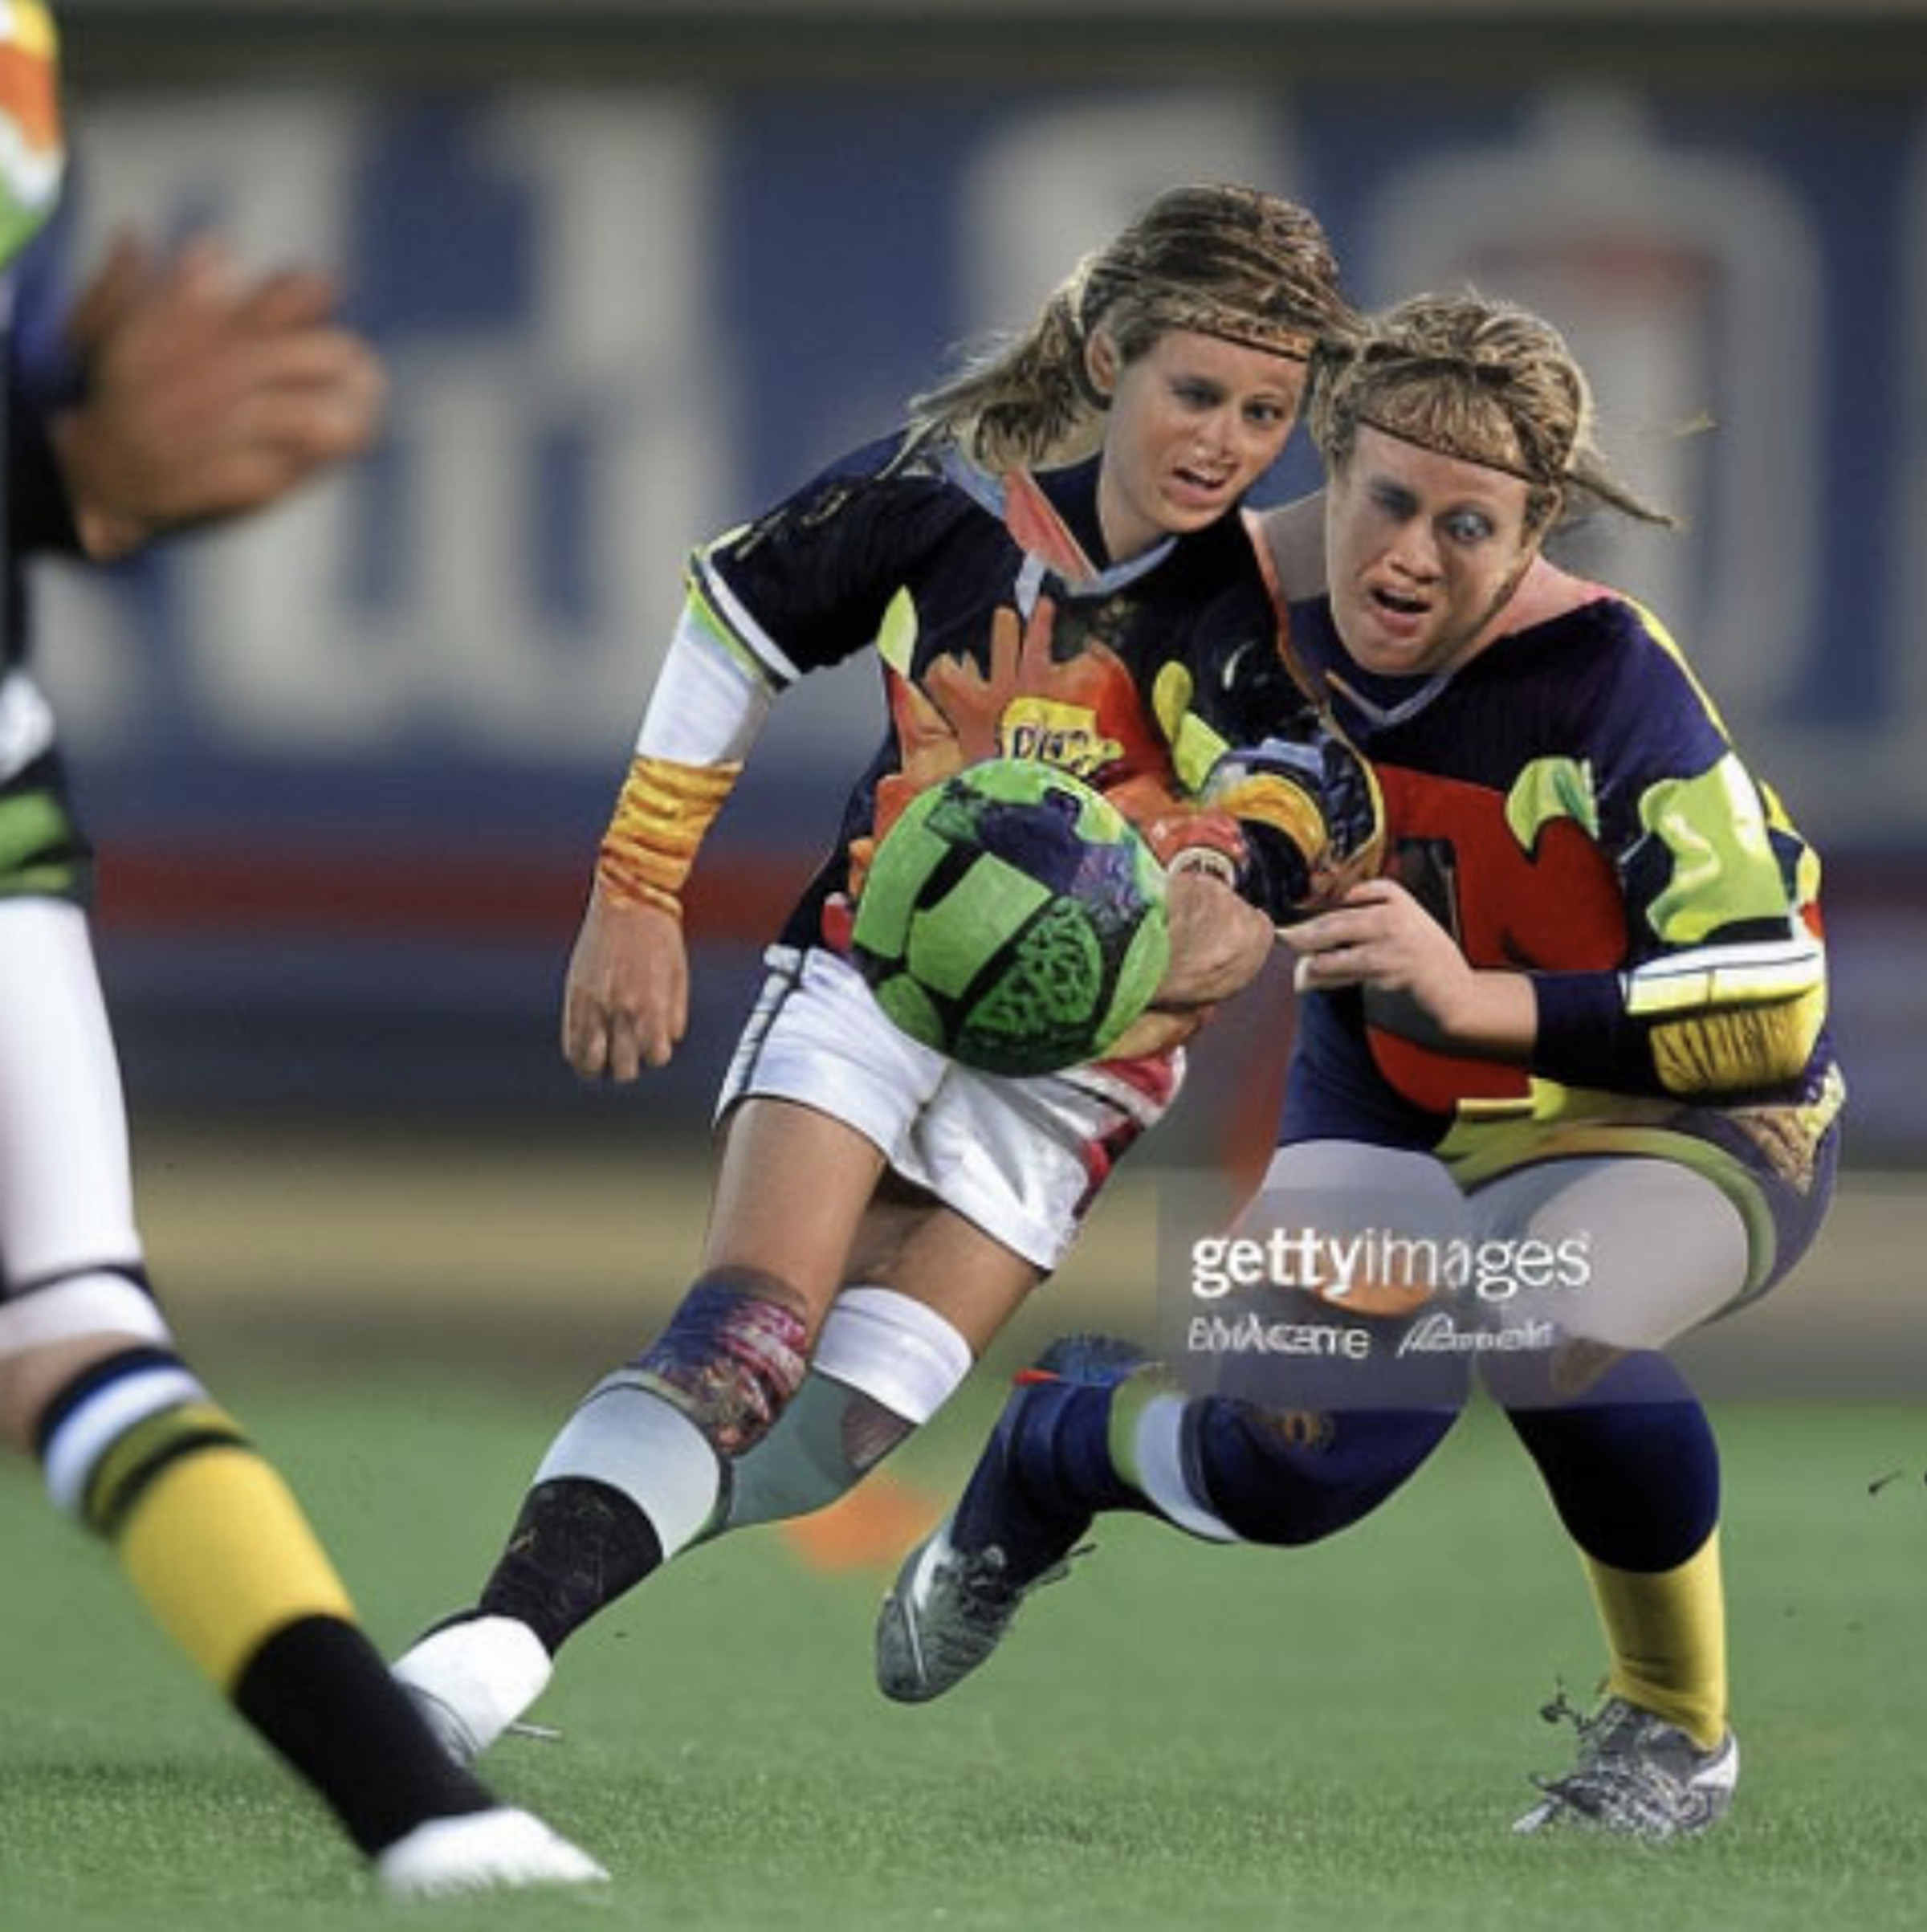 An AI generated image that appears to show two female soccer players. Their limbs and faces are bizarrely distorted though, with extra fingers and indistinct facial features. 